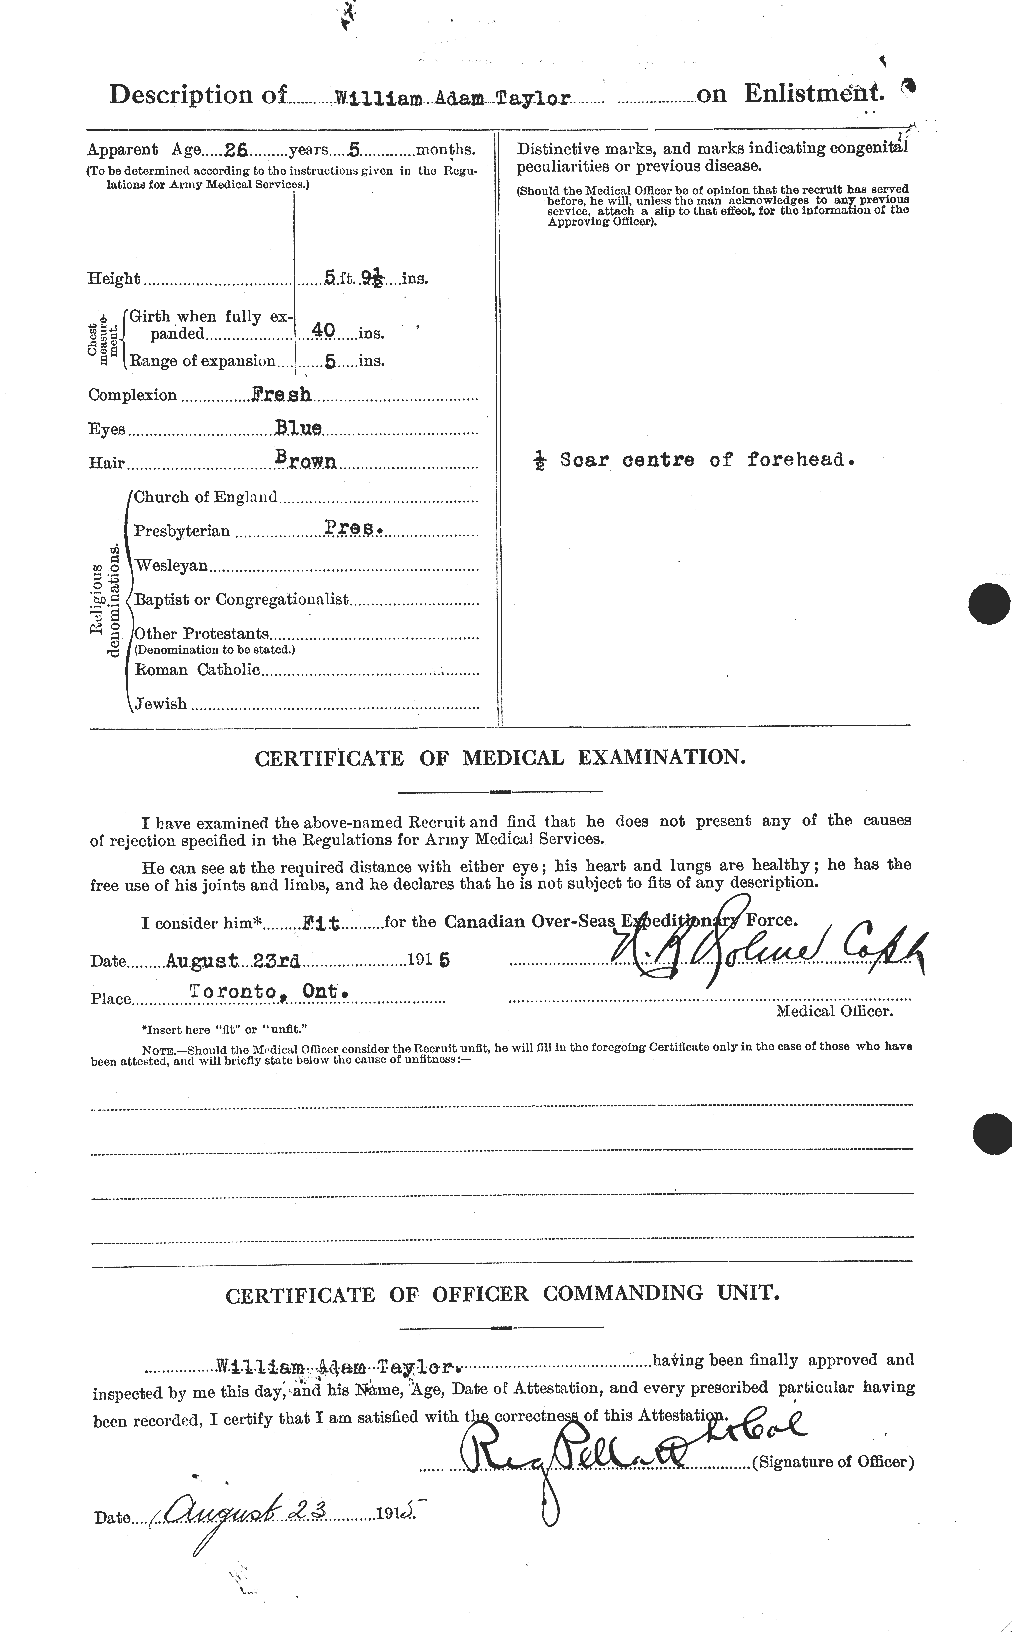 Personnel Records of the First World War - CEF 628195b